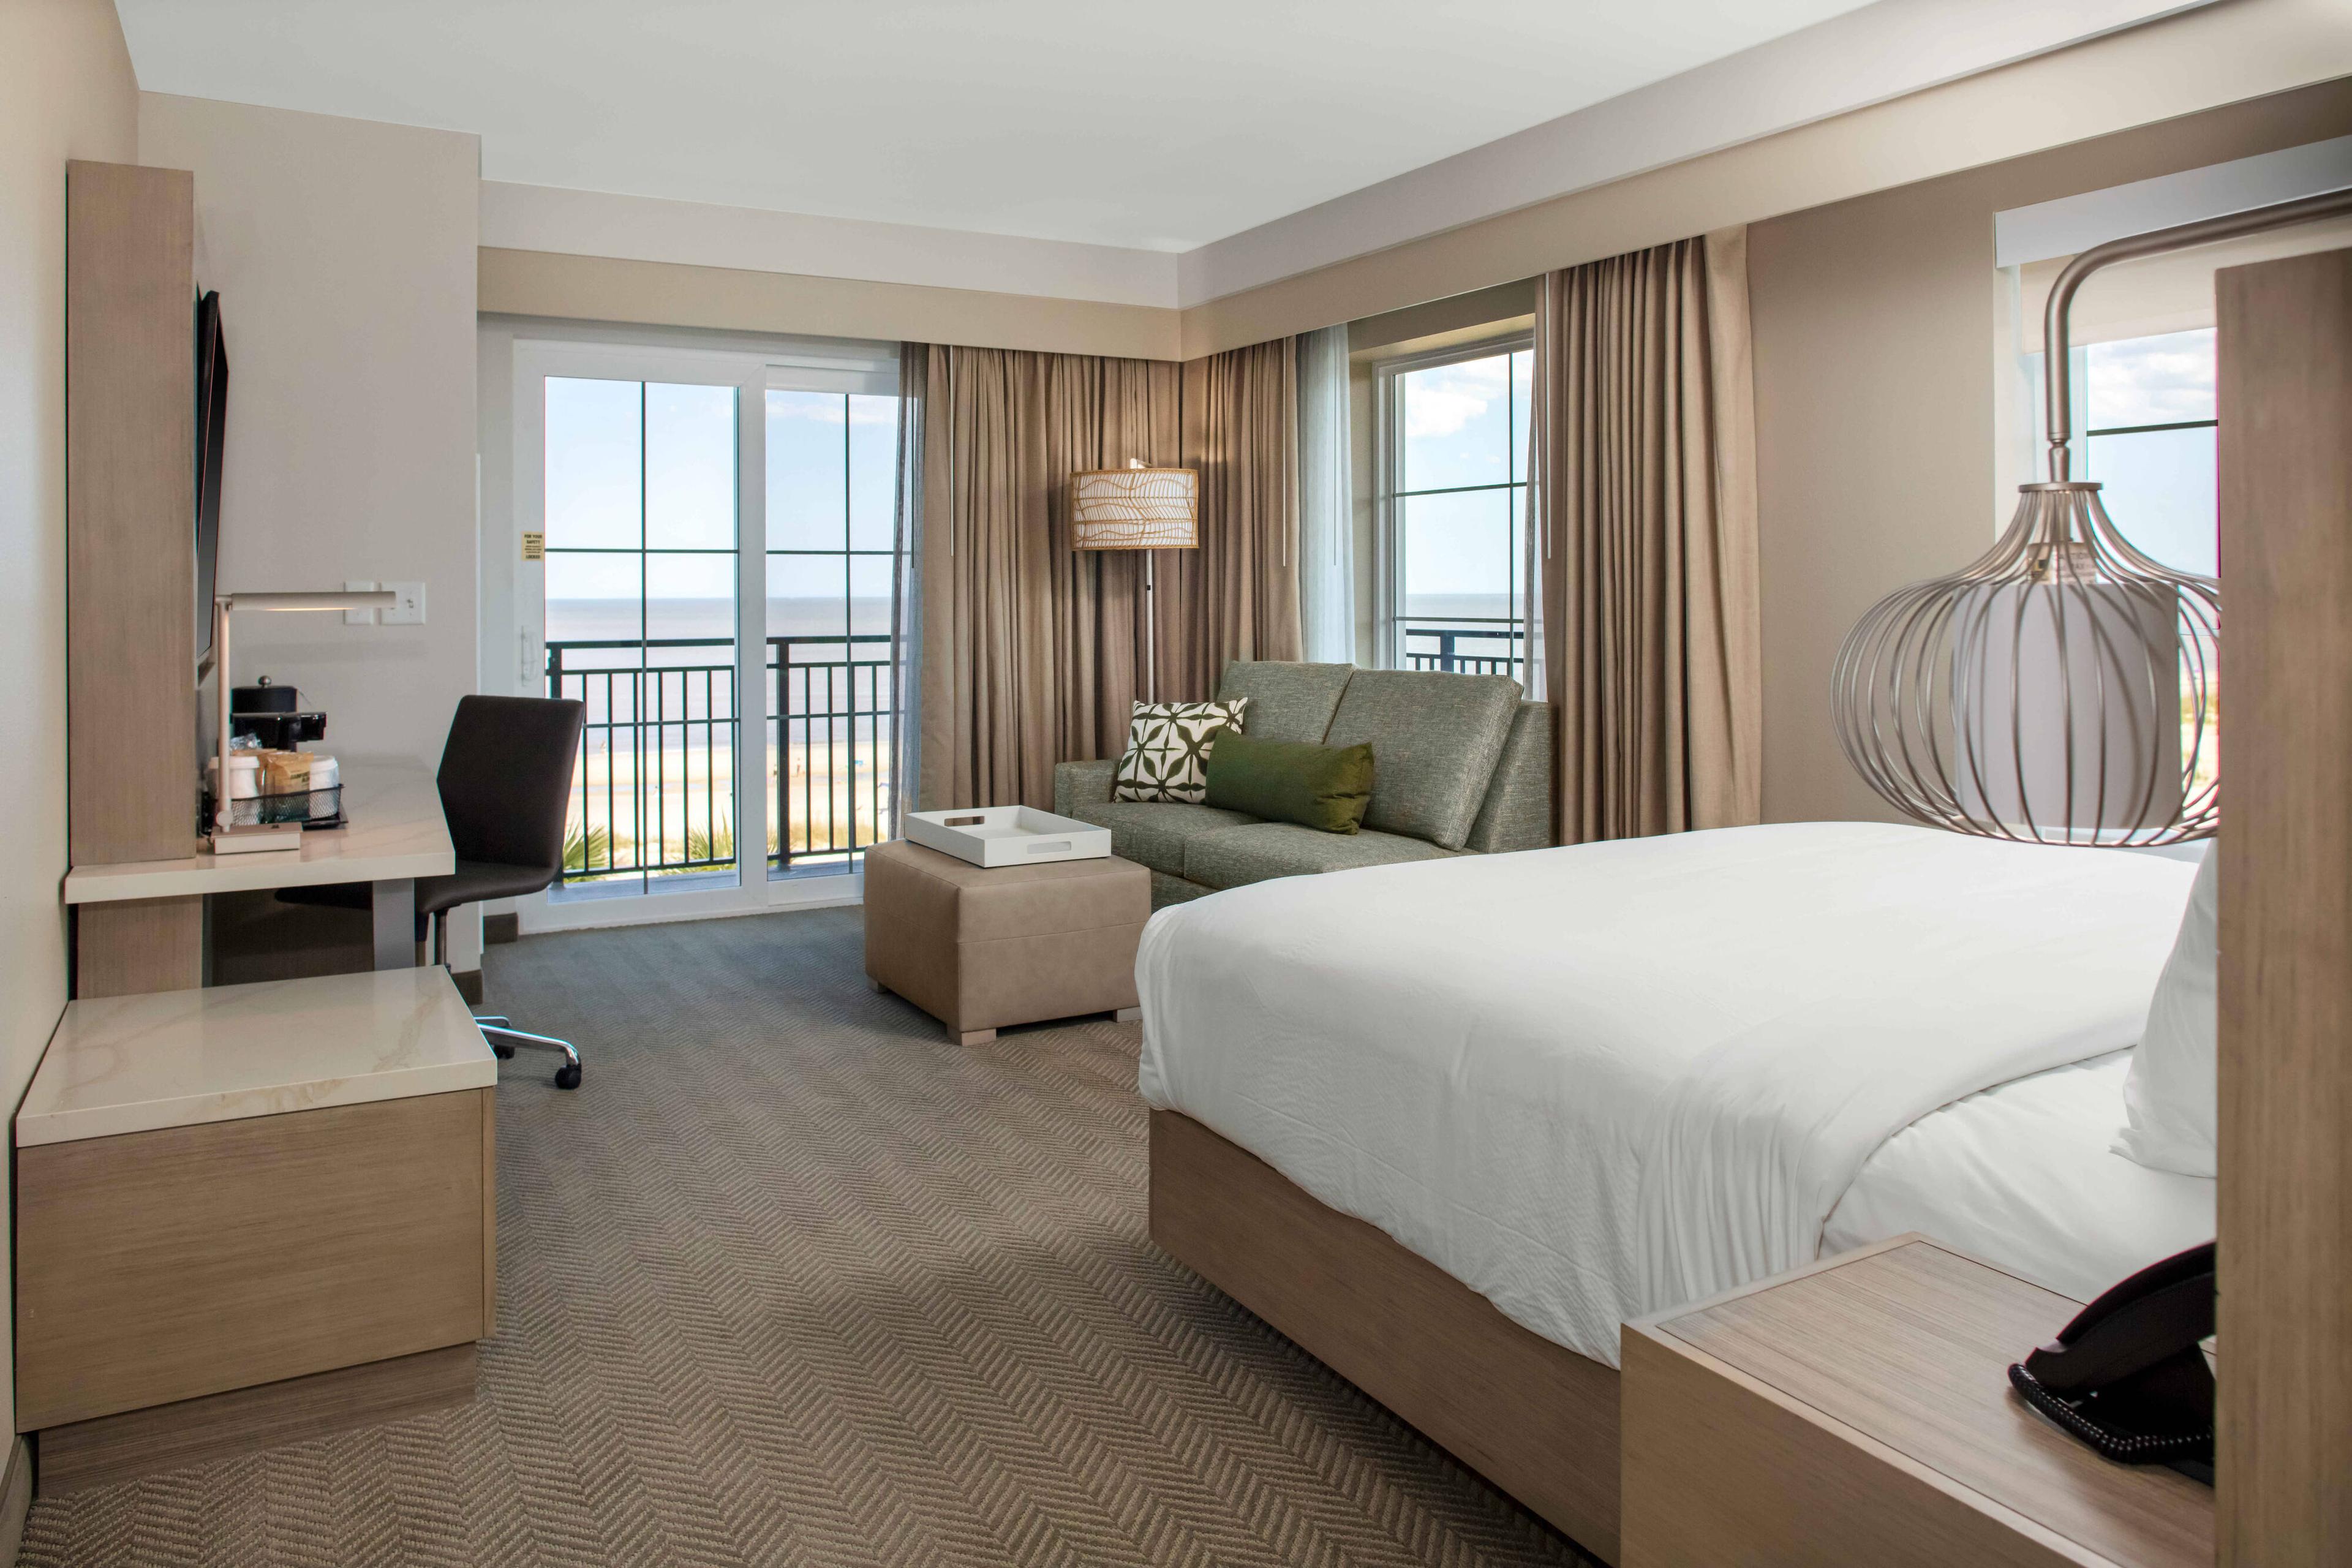 Our premium oceanfront king guest room offers a luxurious king bed and comfortable sitting area.